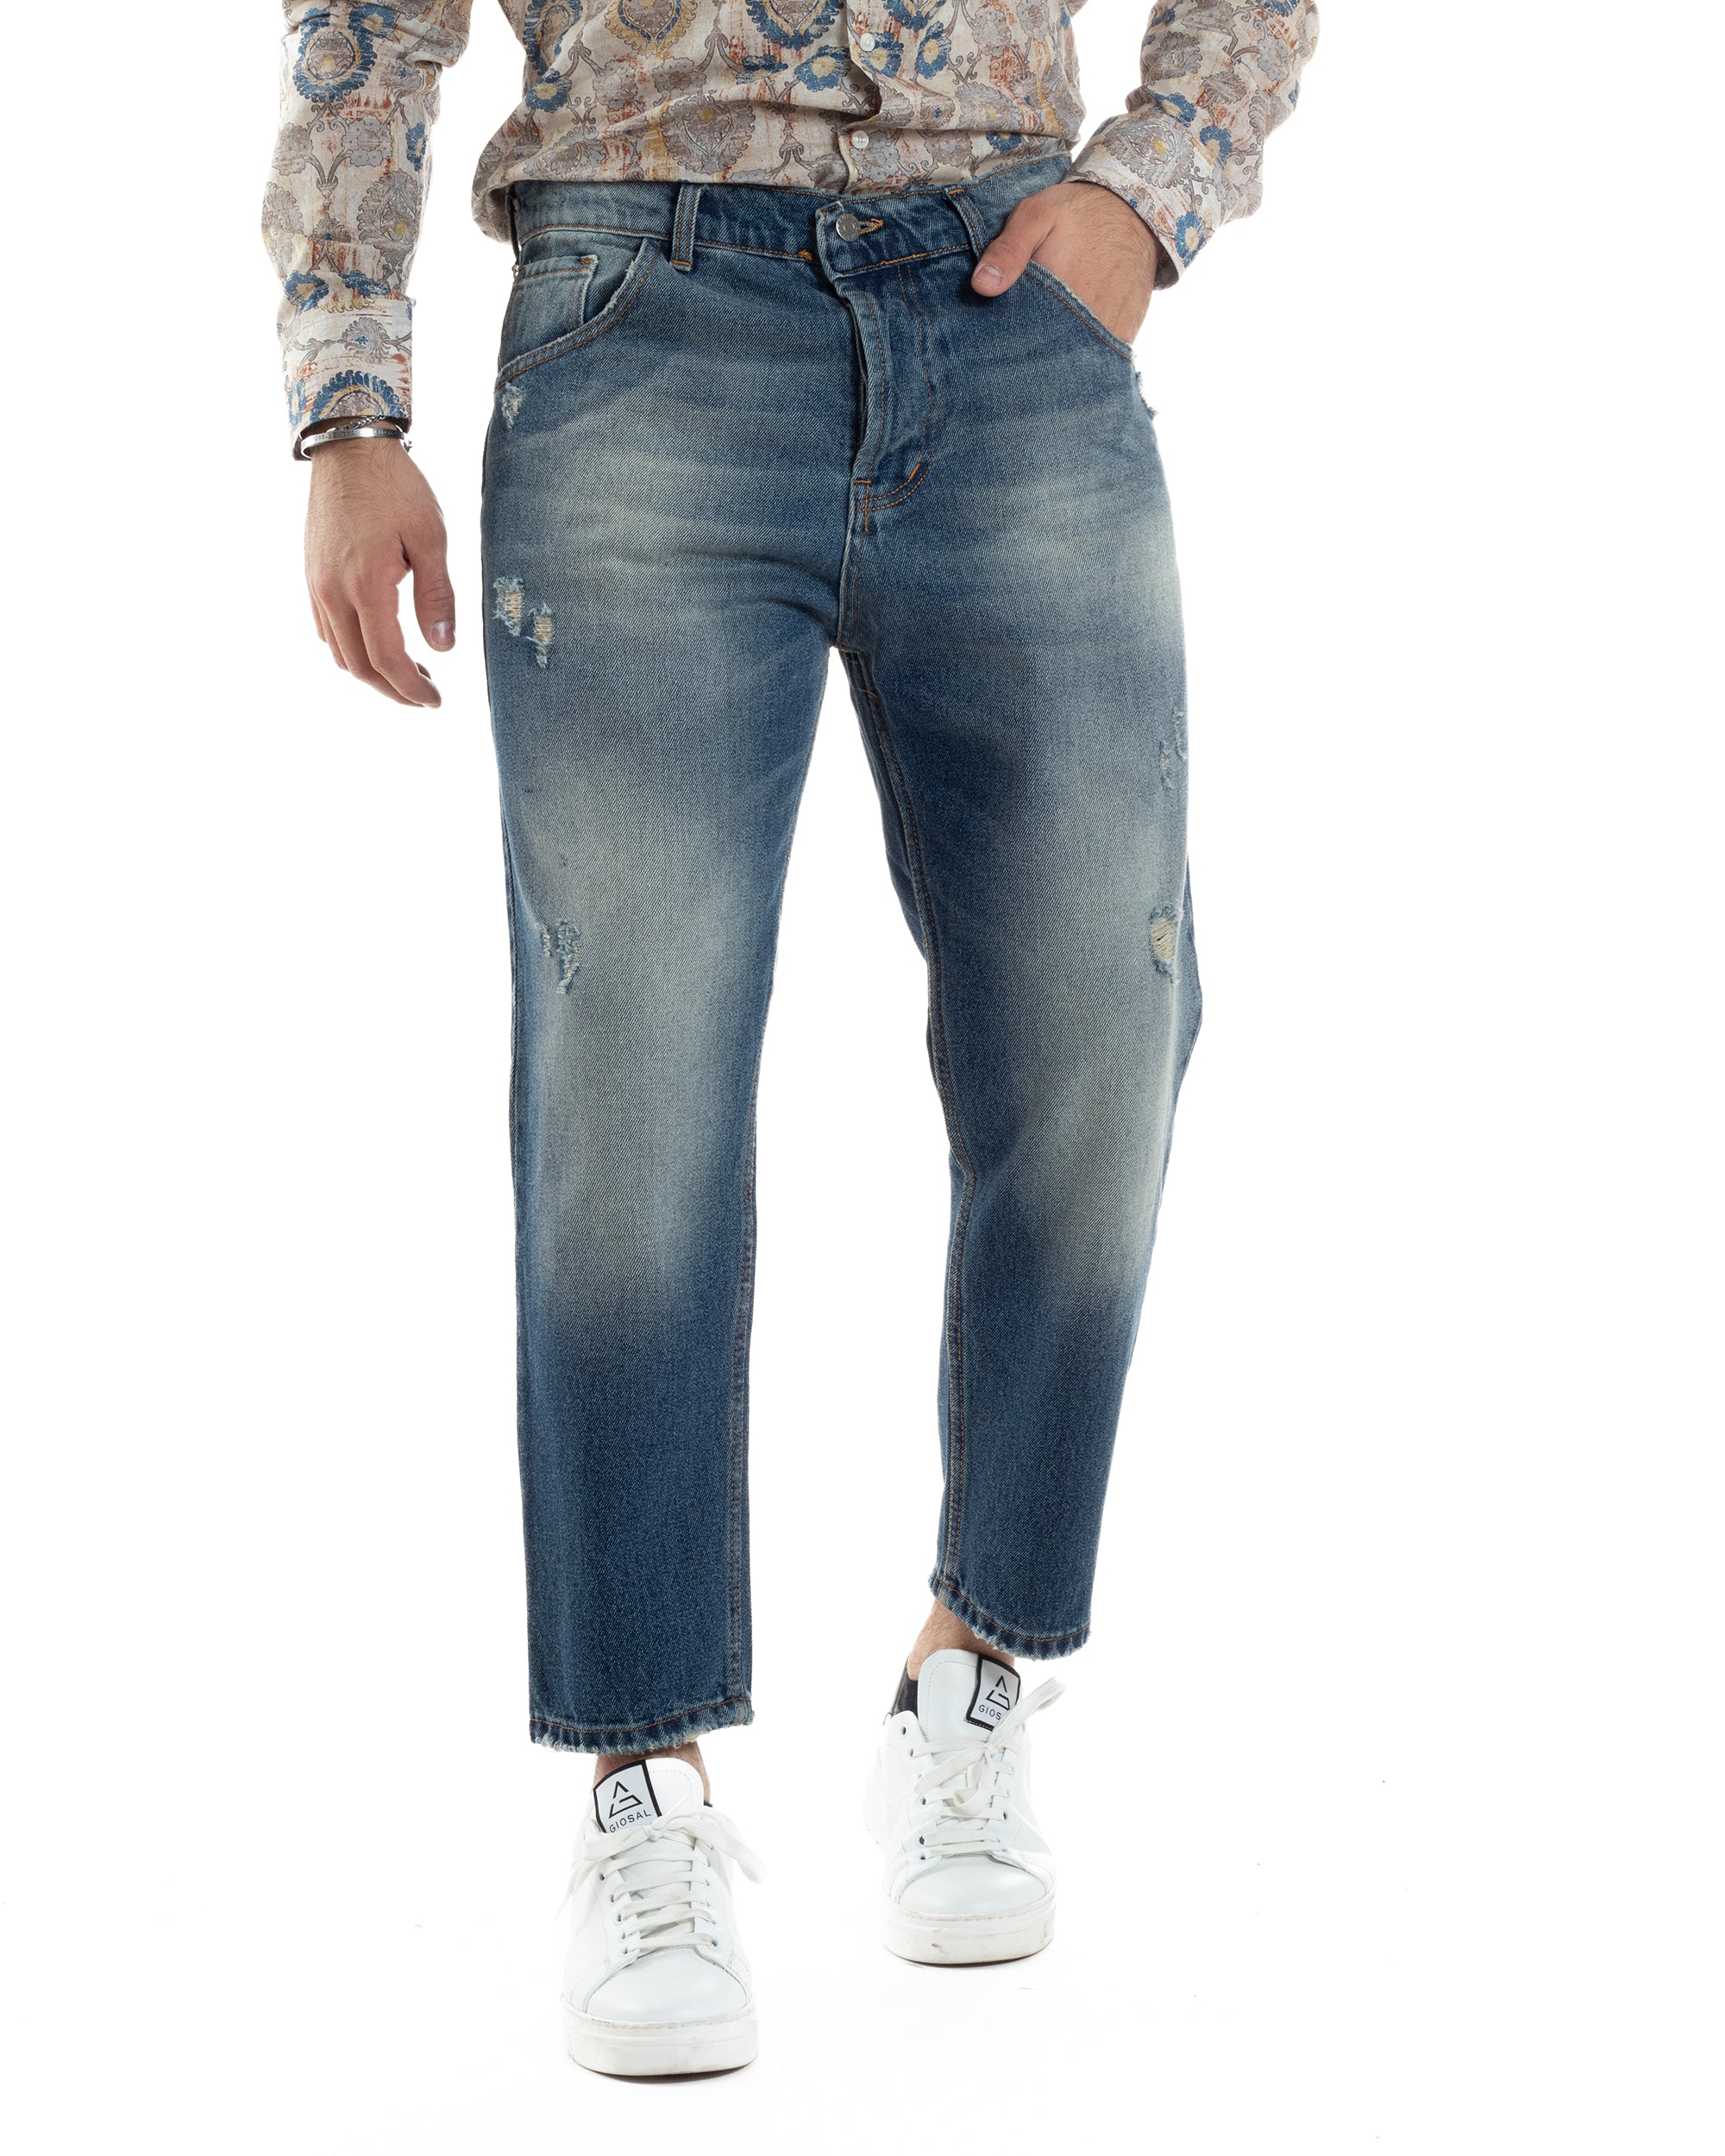 Men's Jeans Trousers Loose Fit Sanded Denim With Rips Five Pockets GIOSAL-P5586A